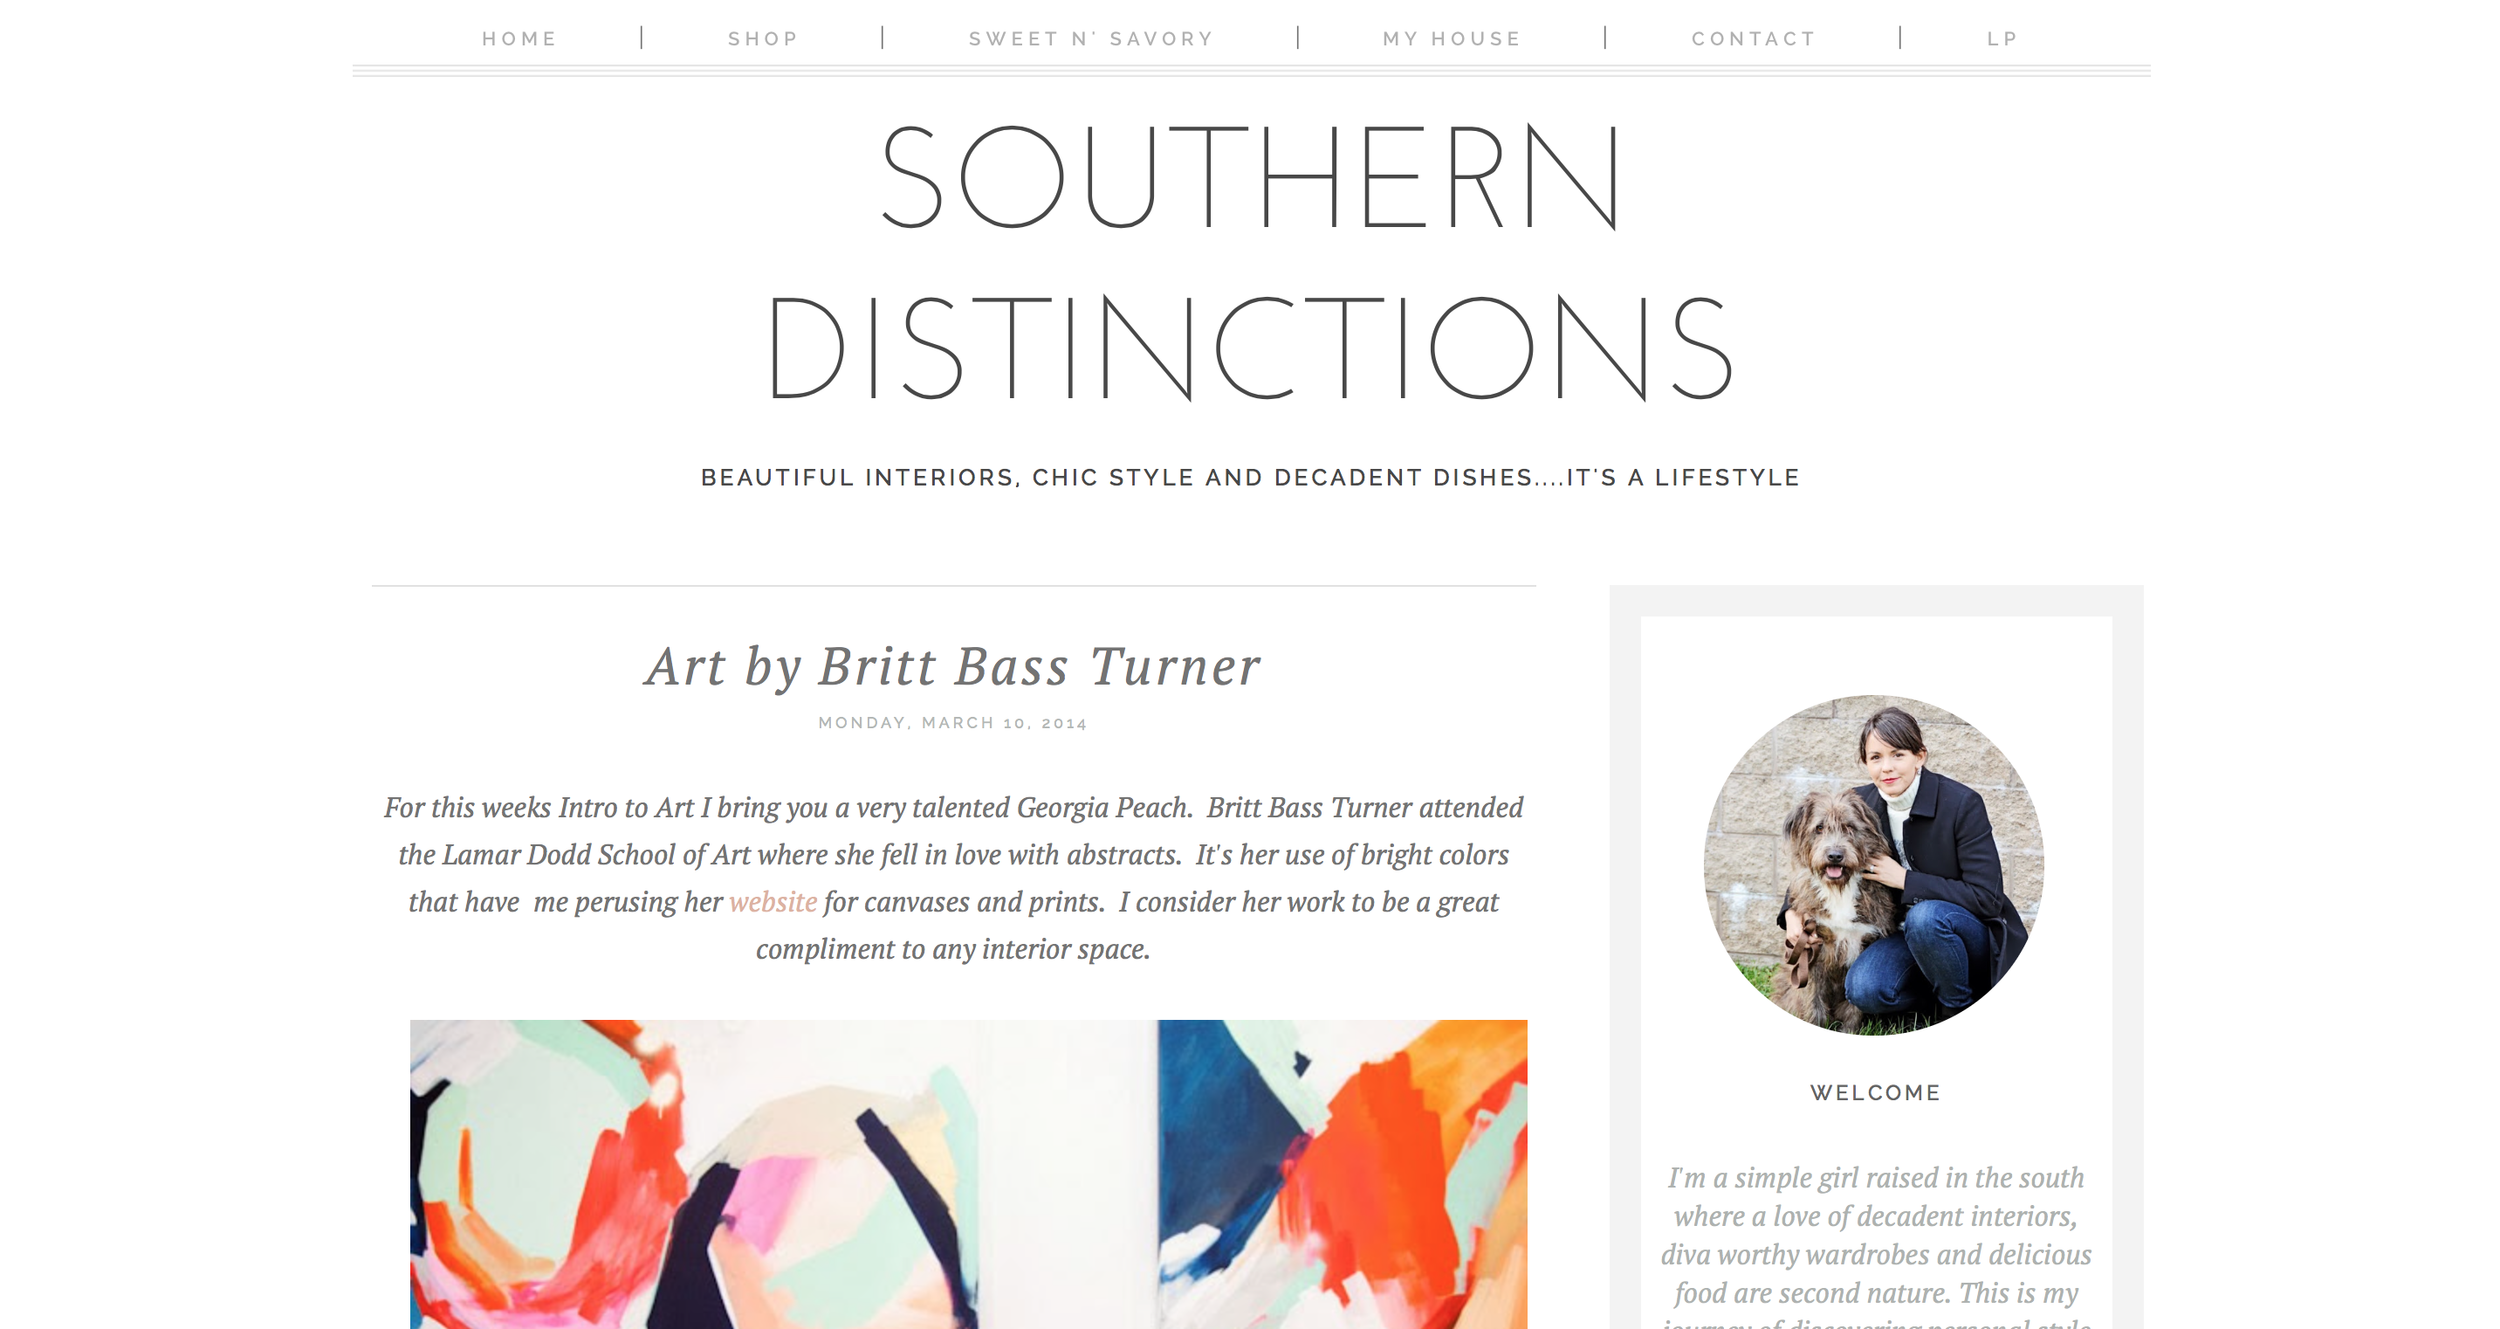 Southern Distinctions